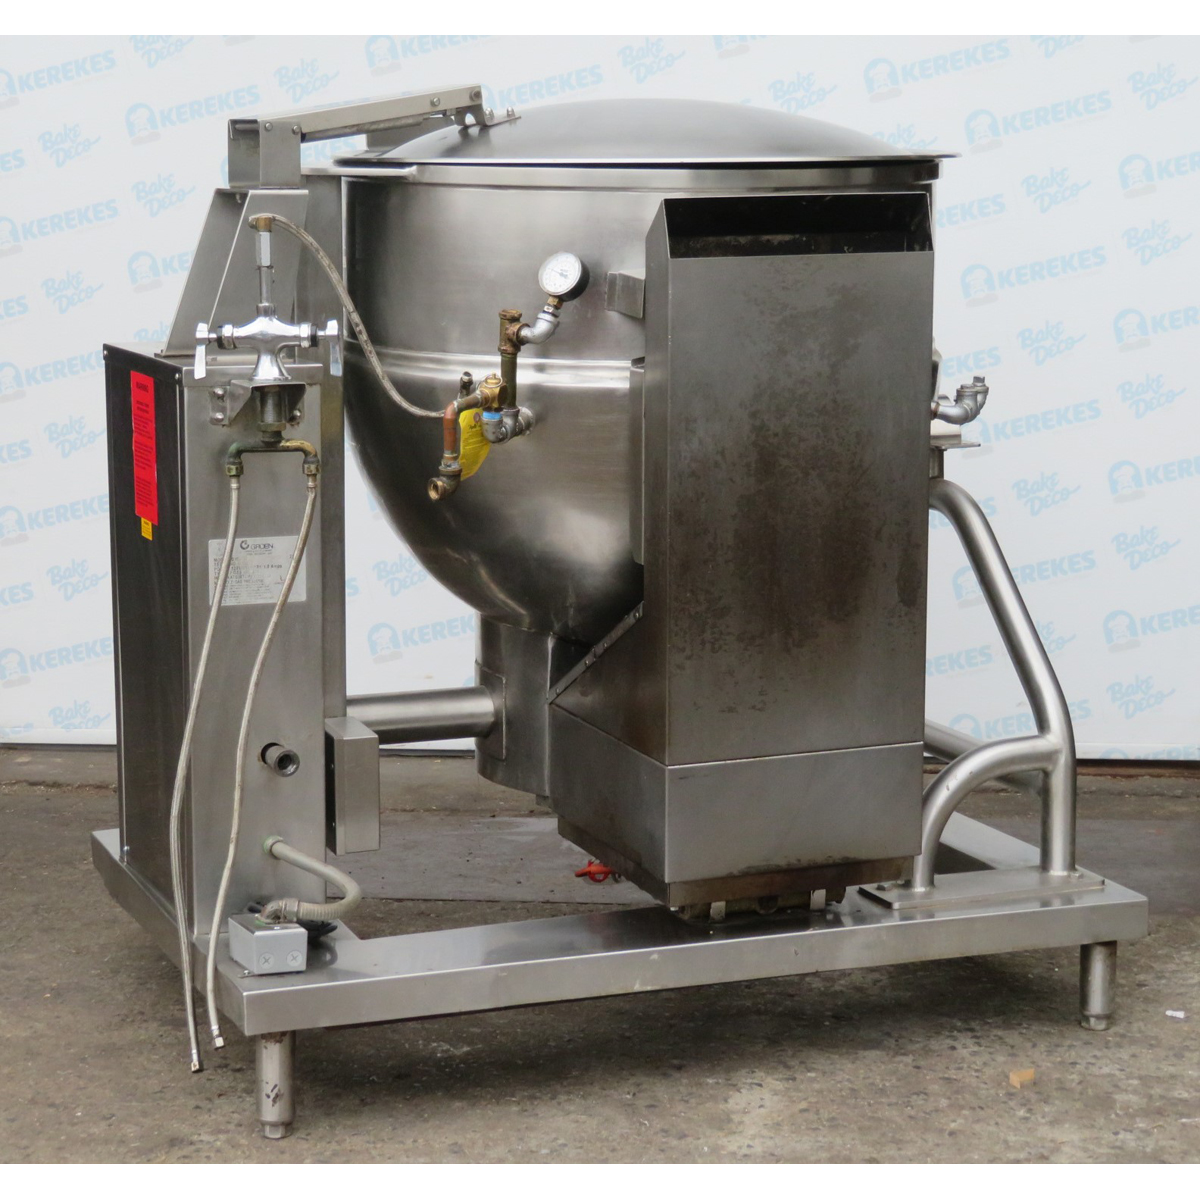 Groen DHT-80 80 Gallon Tilt Kettle, Used Great Condition image 5